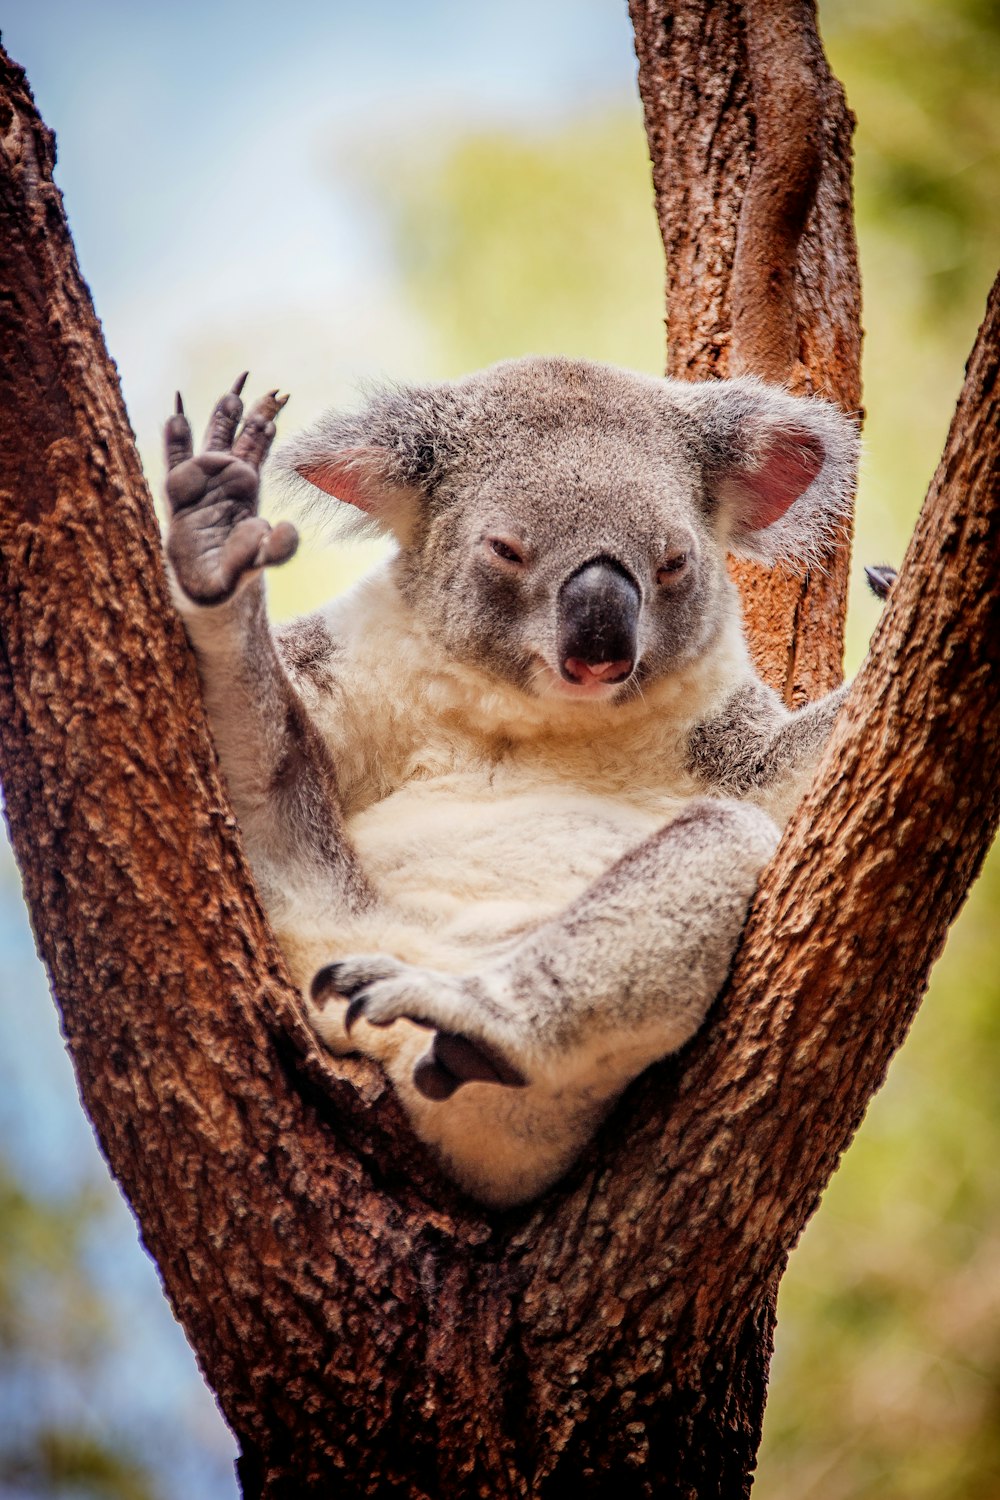  News Without Politics, Could a forensic investigator's worst nightmare be a Koala's fingerprint?, science, bears, Koala bear, top news without politics, subscribe, NWP